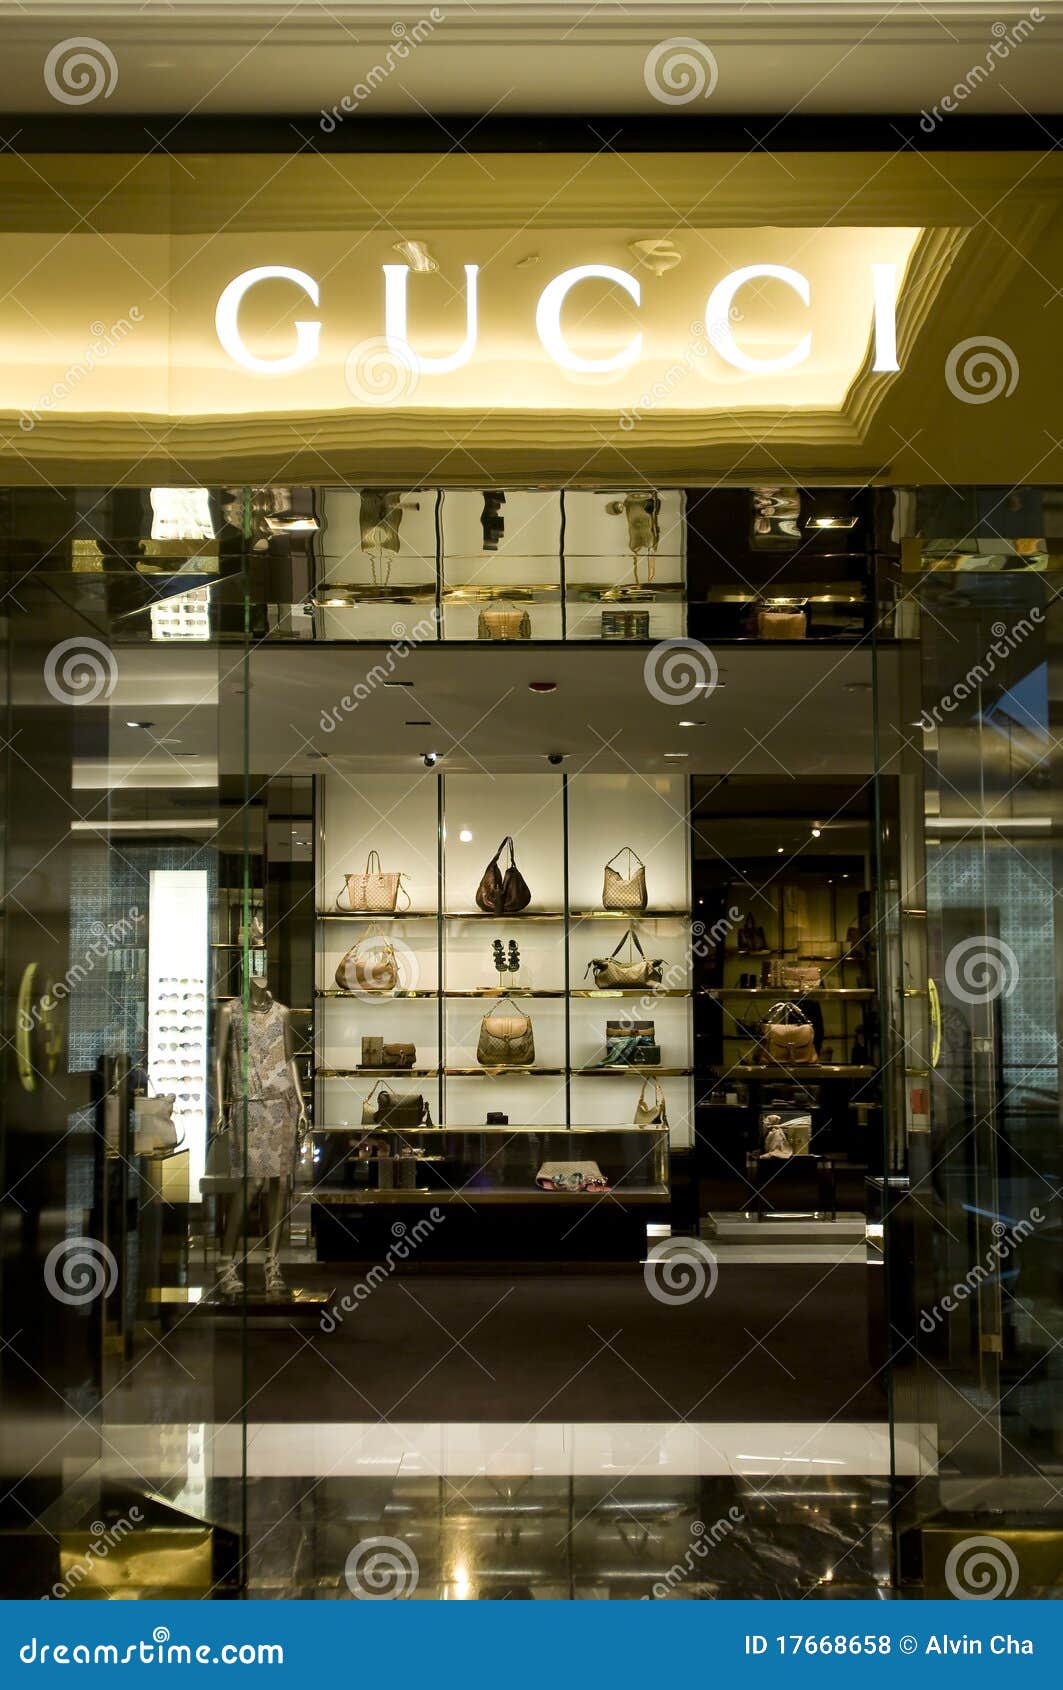 Gucci Shop In The Mall Of The Emirates Editorial Stock Photo - Image: 17668658